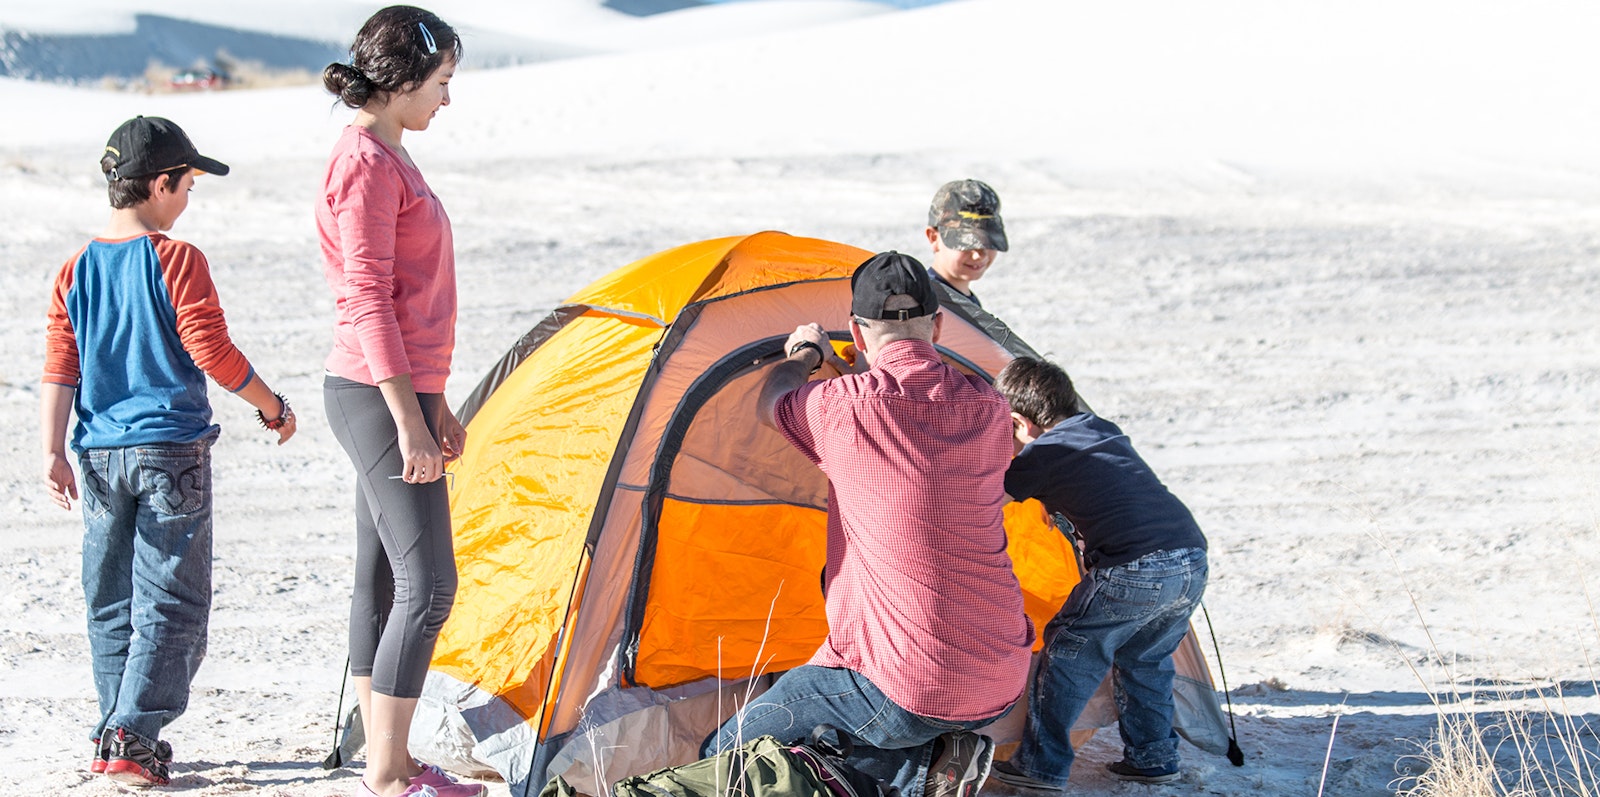 A family sets up a small yellow tent on sand dunes